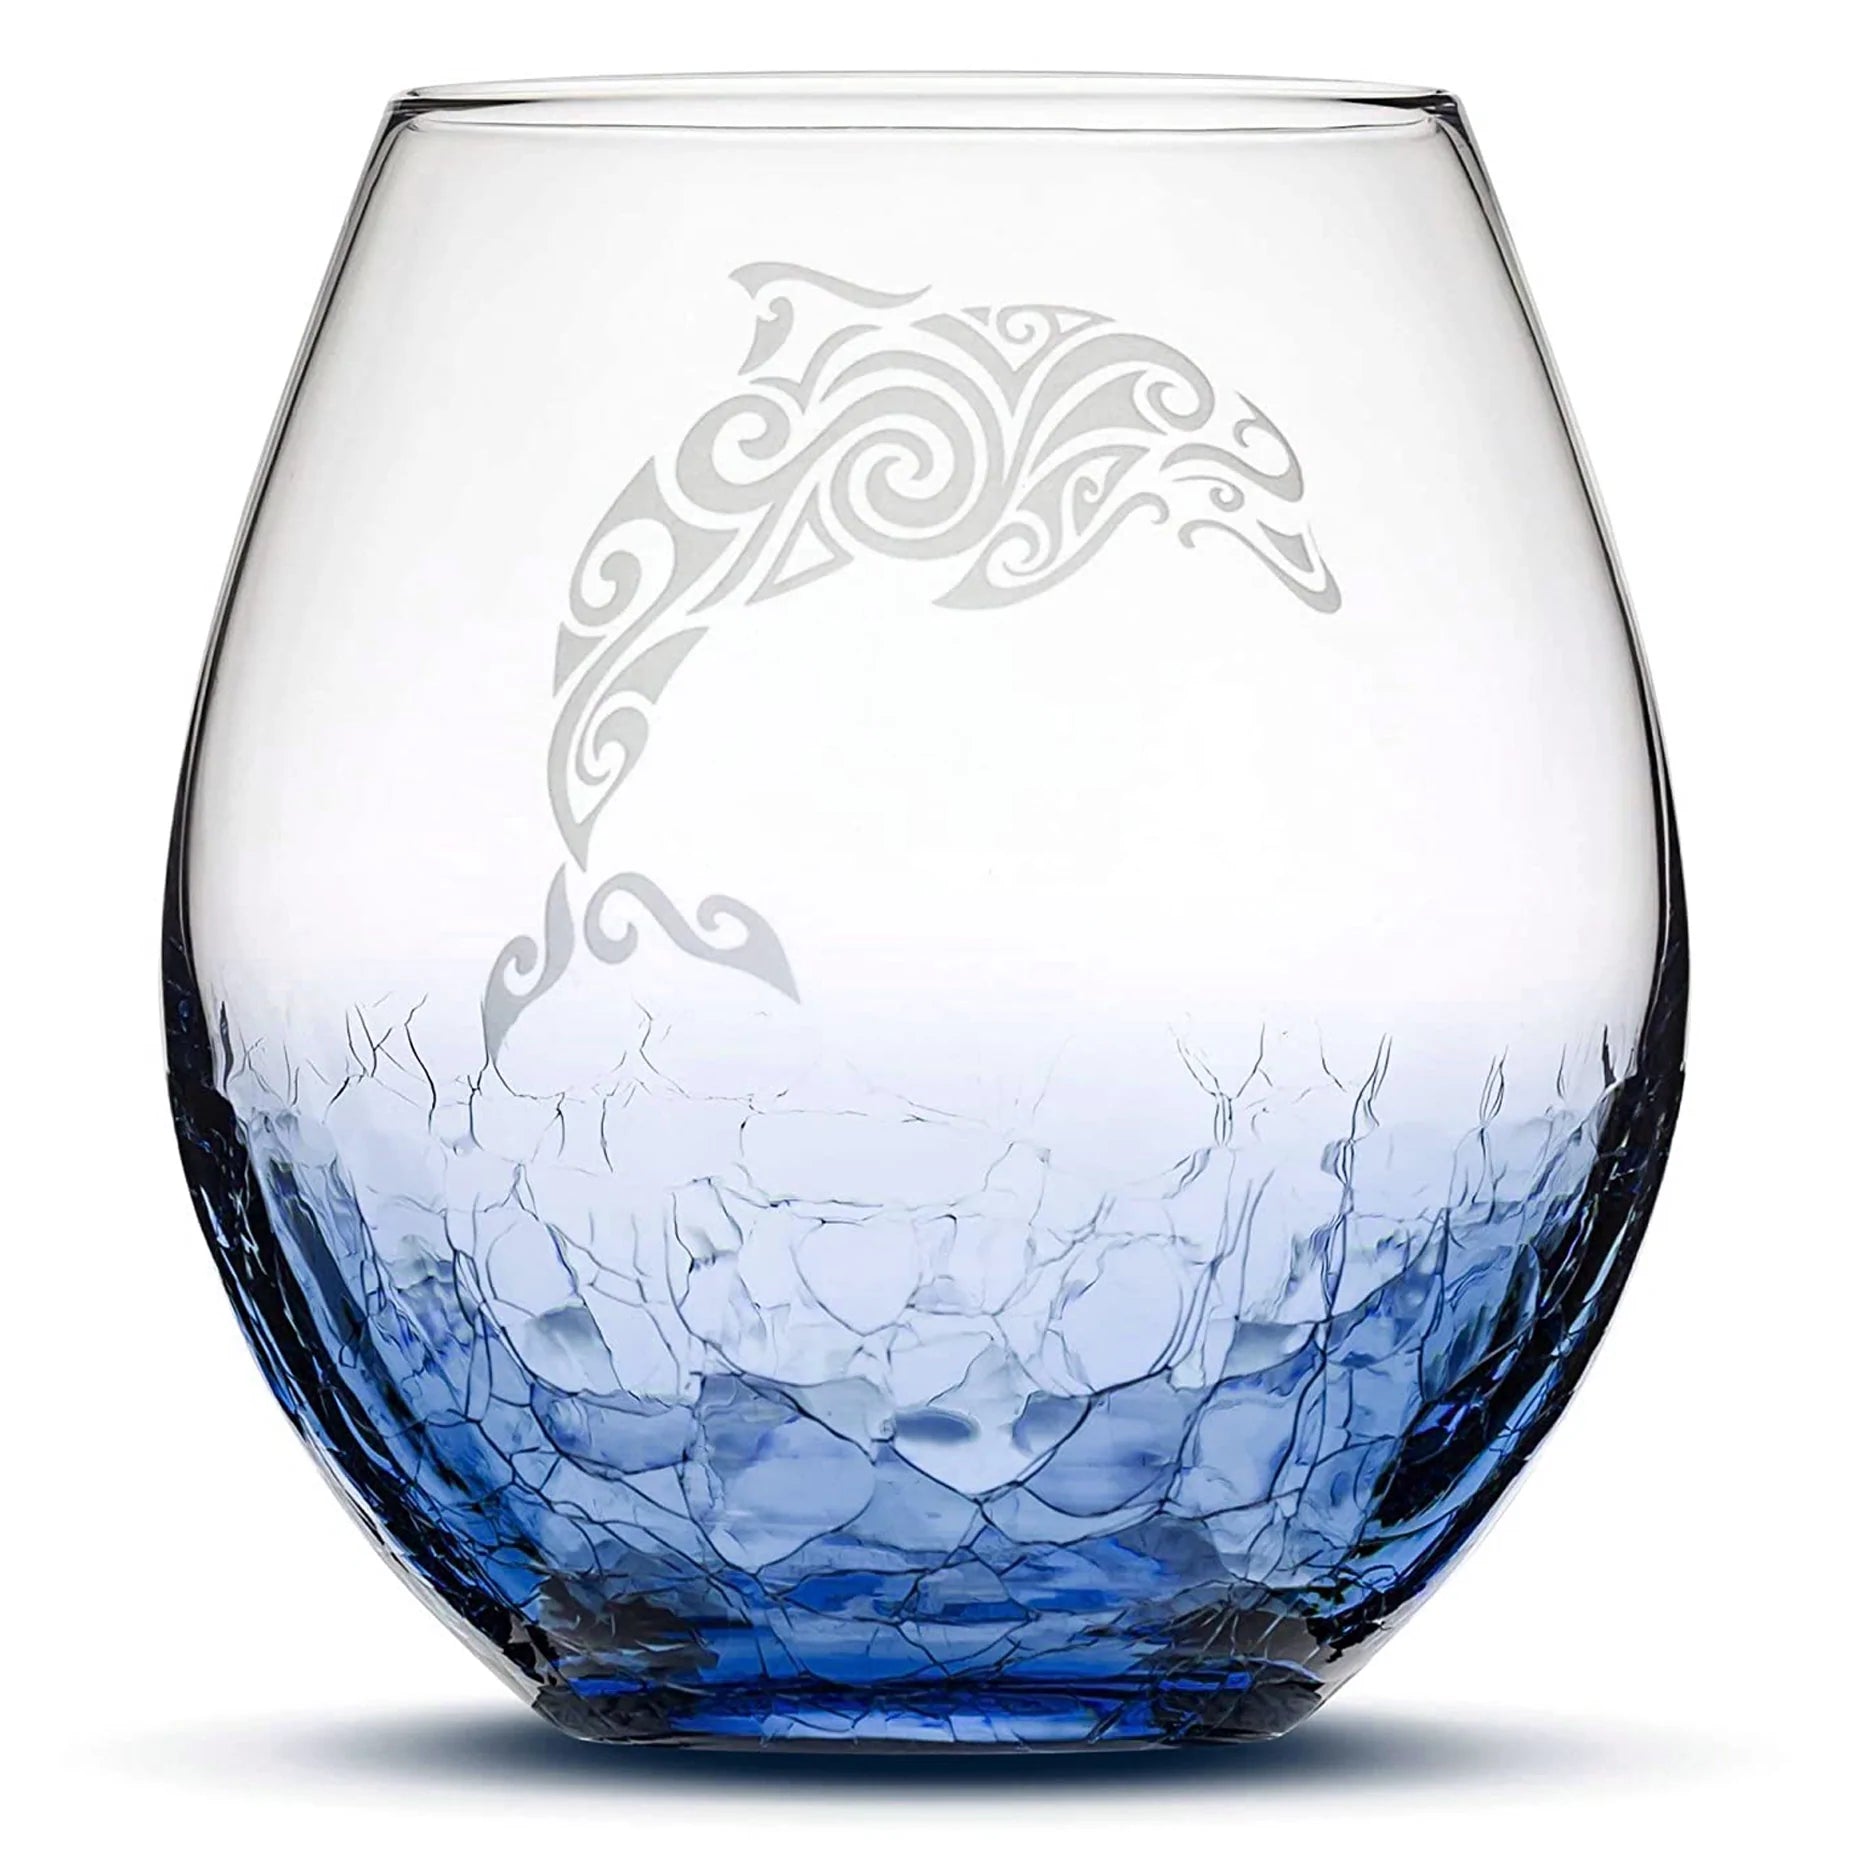 Less Than Perfect Crackle Teal Wine Glass, Dolphin Design, Laser Etched or Hand Etched, 18oz